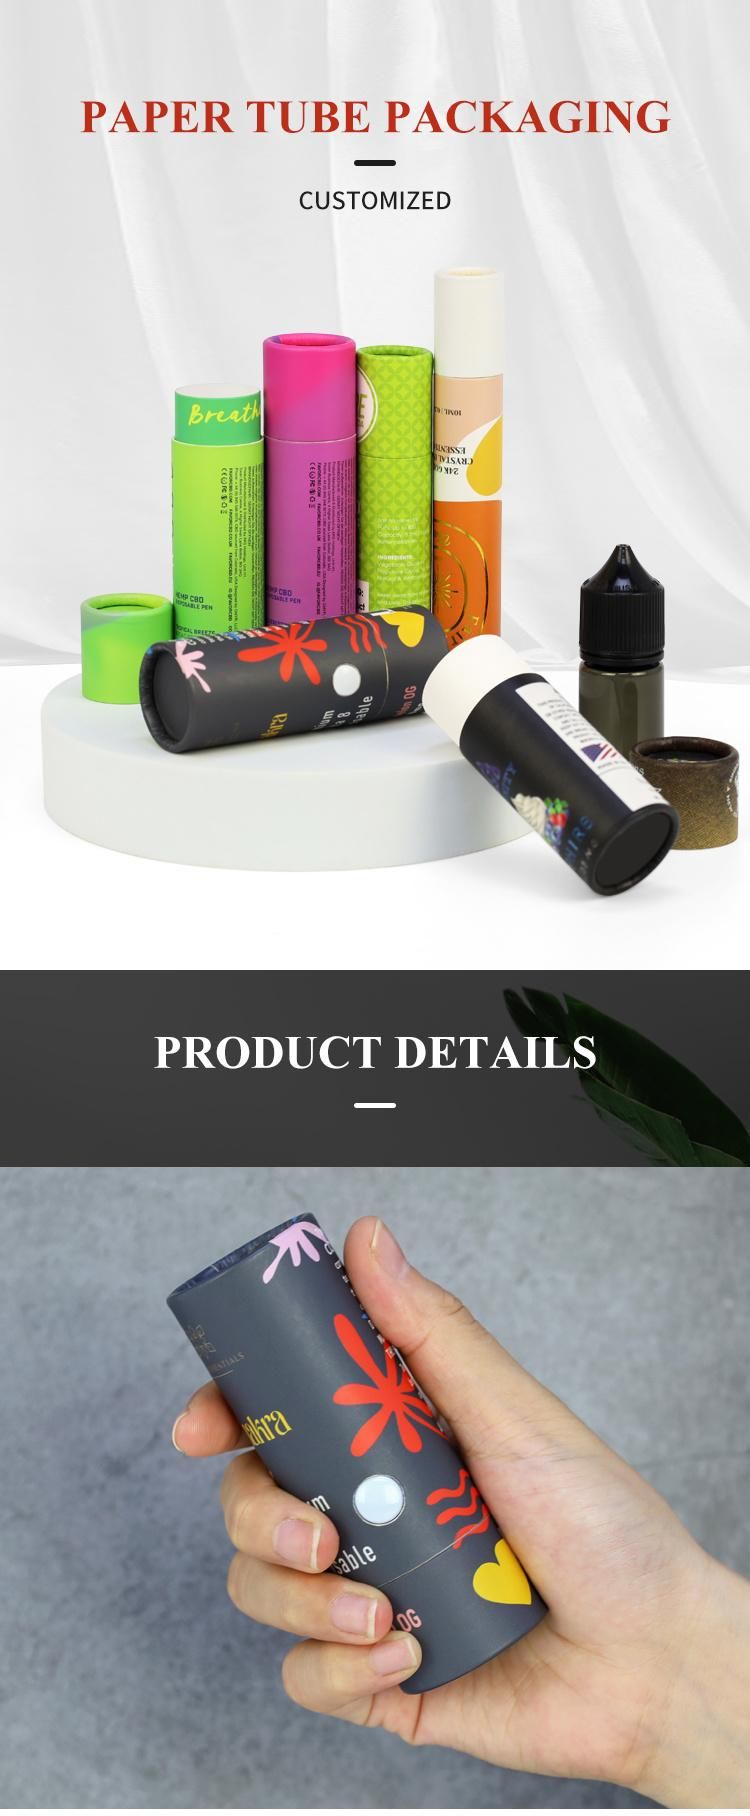 Firstsail Child Resistant Press Button Gift Round Packaging Box Rolling Edge Lip Balm Push up Paper Tube